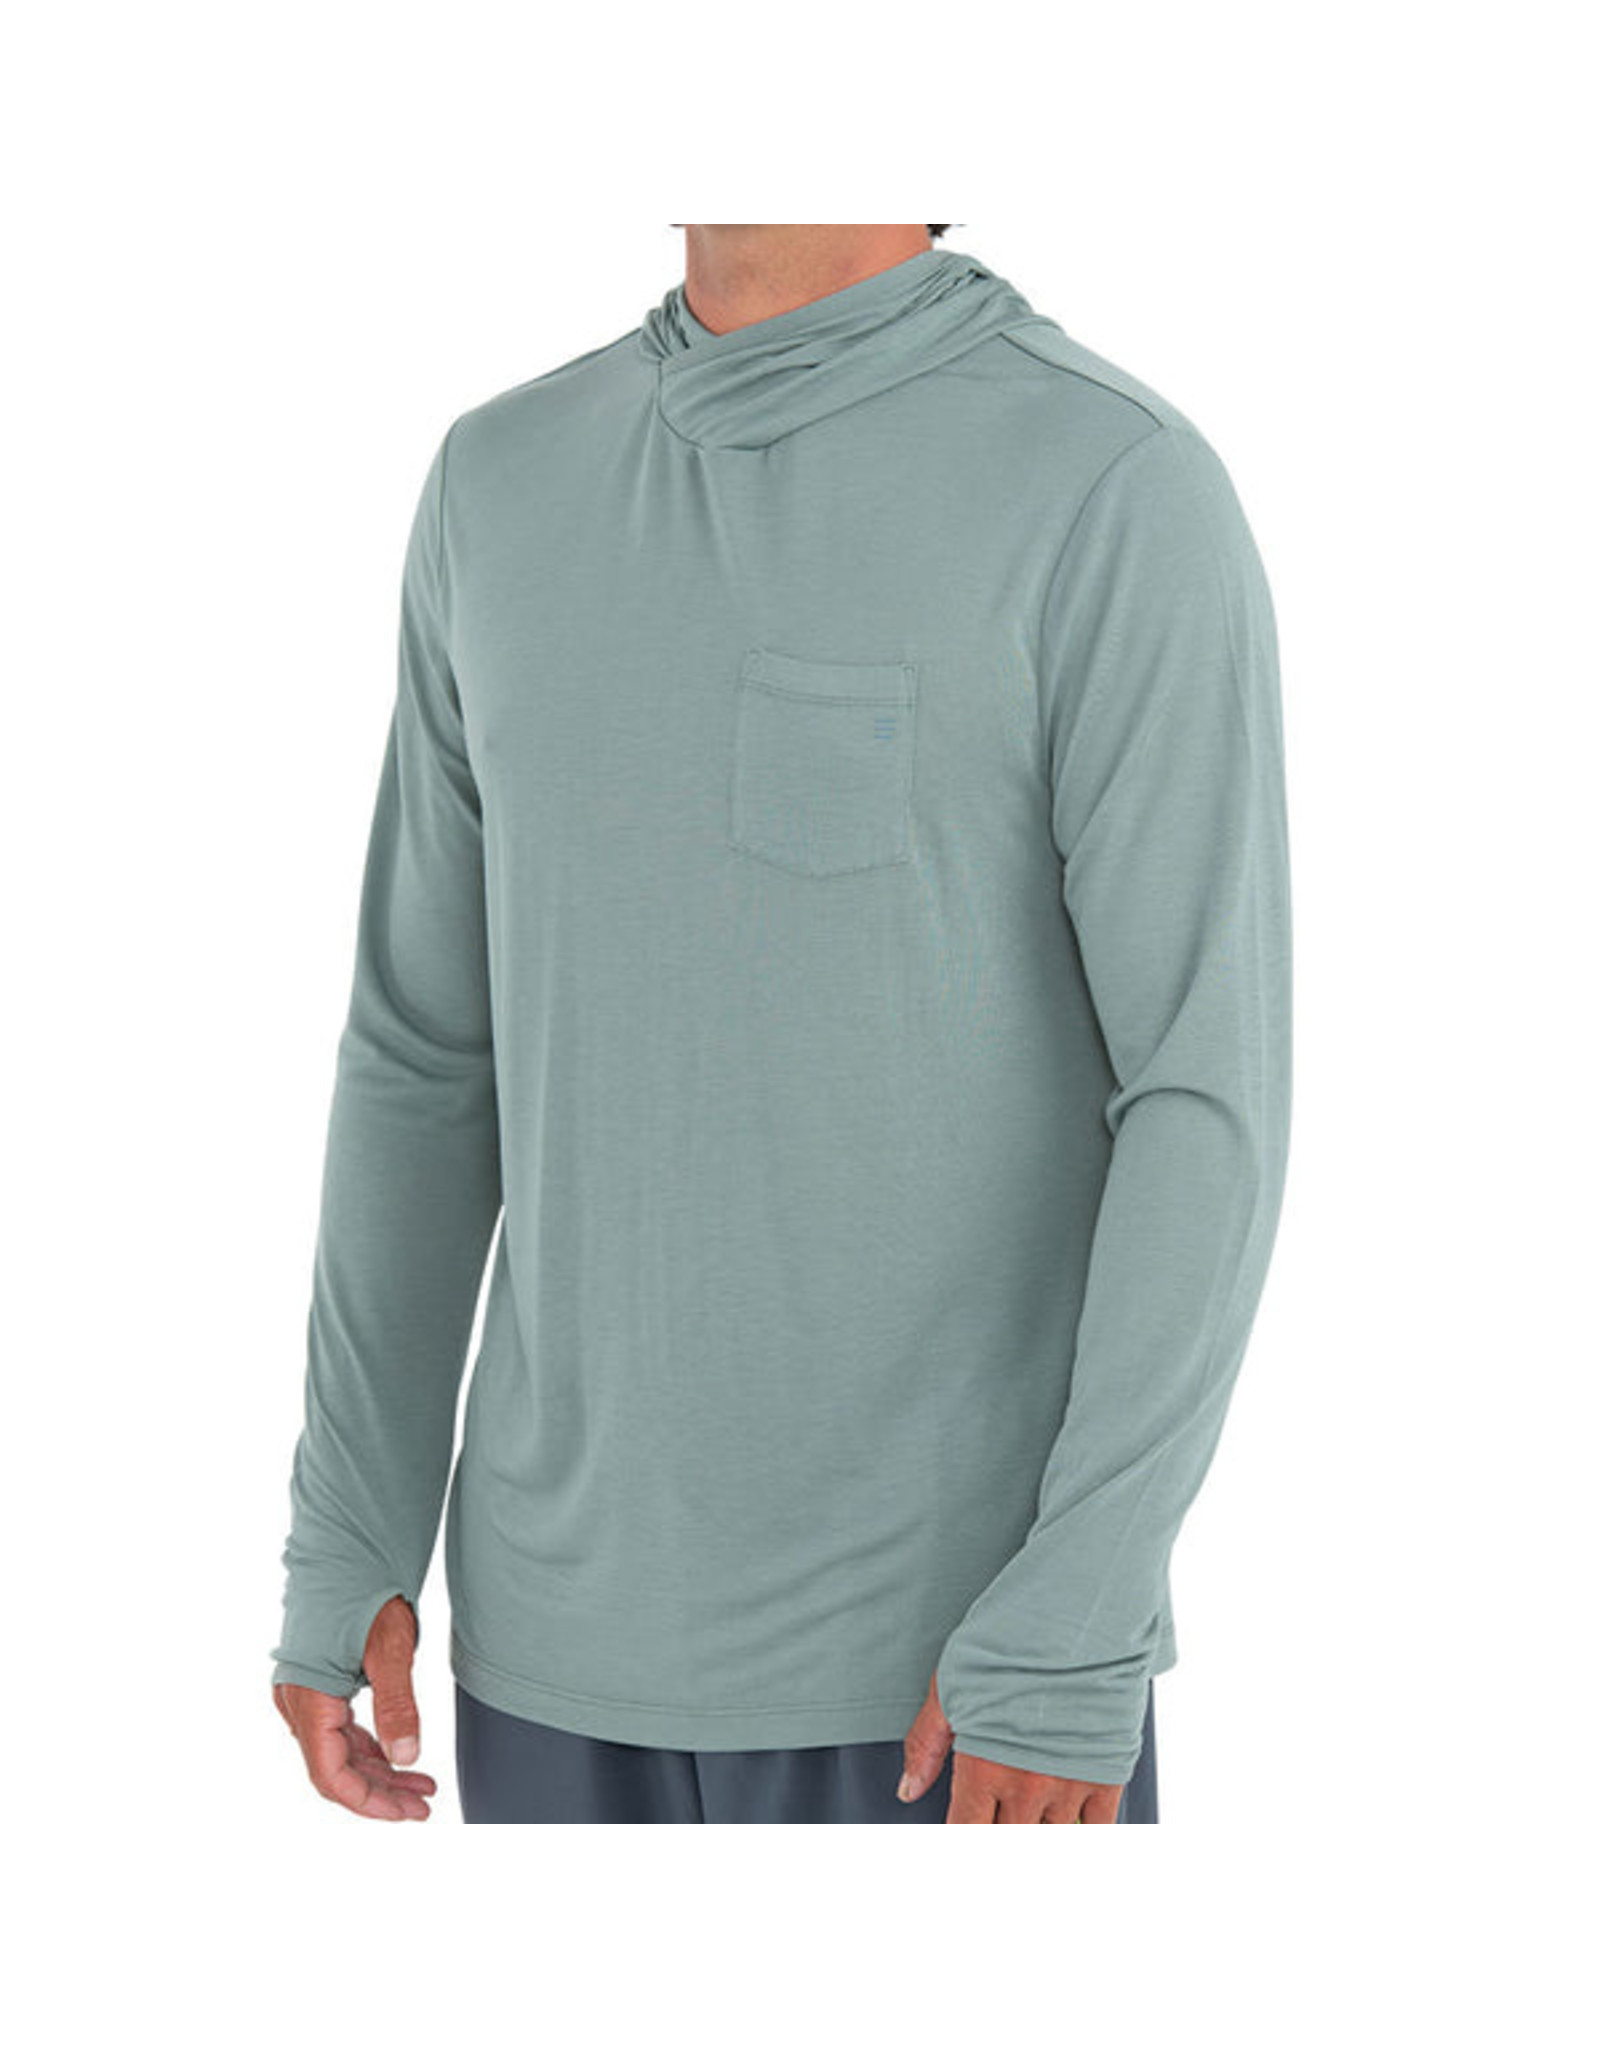 Free Fly Free Fly M's Bamboo Lightweight Hoody